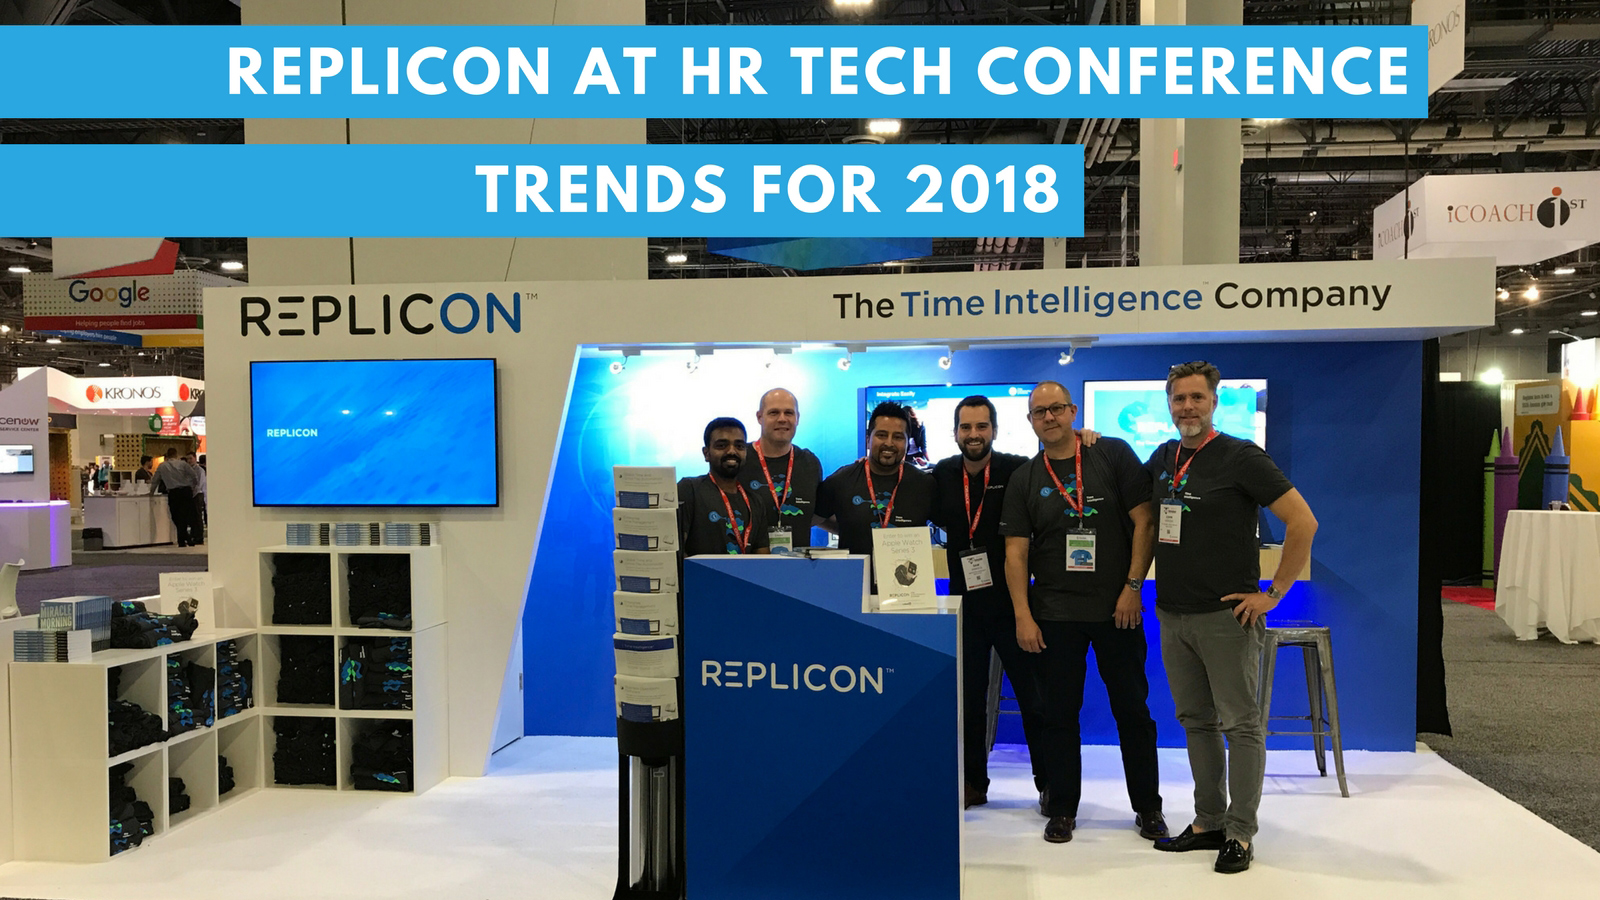 Replicon at HR Tech Conference: Trends for 2018